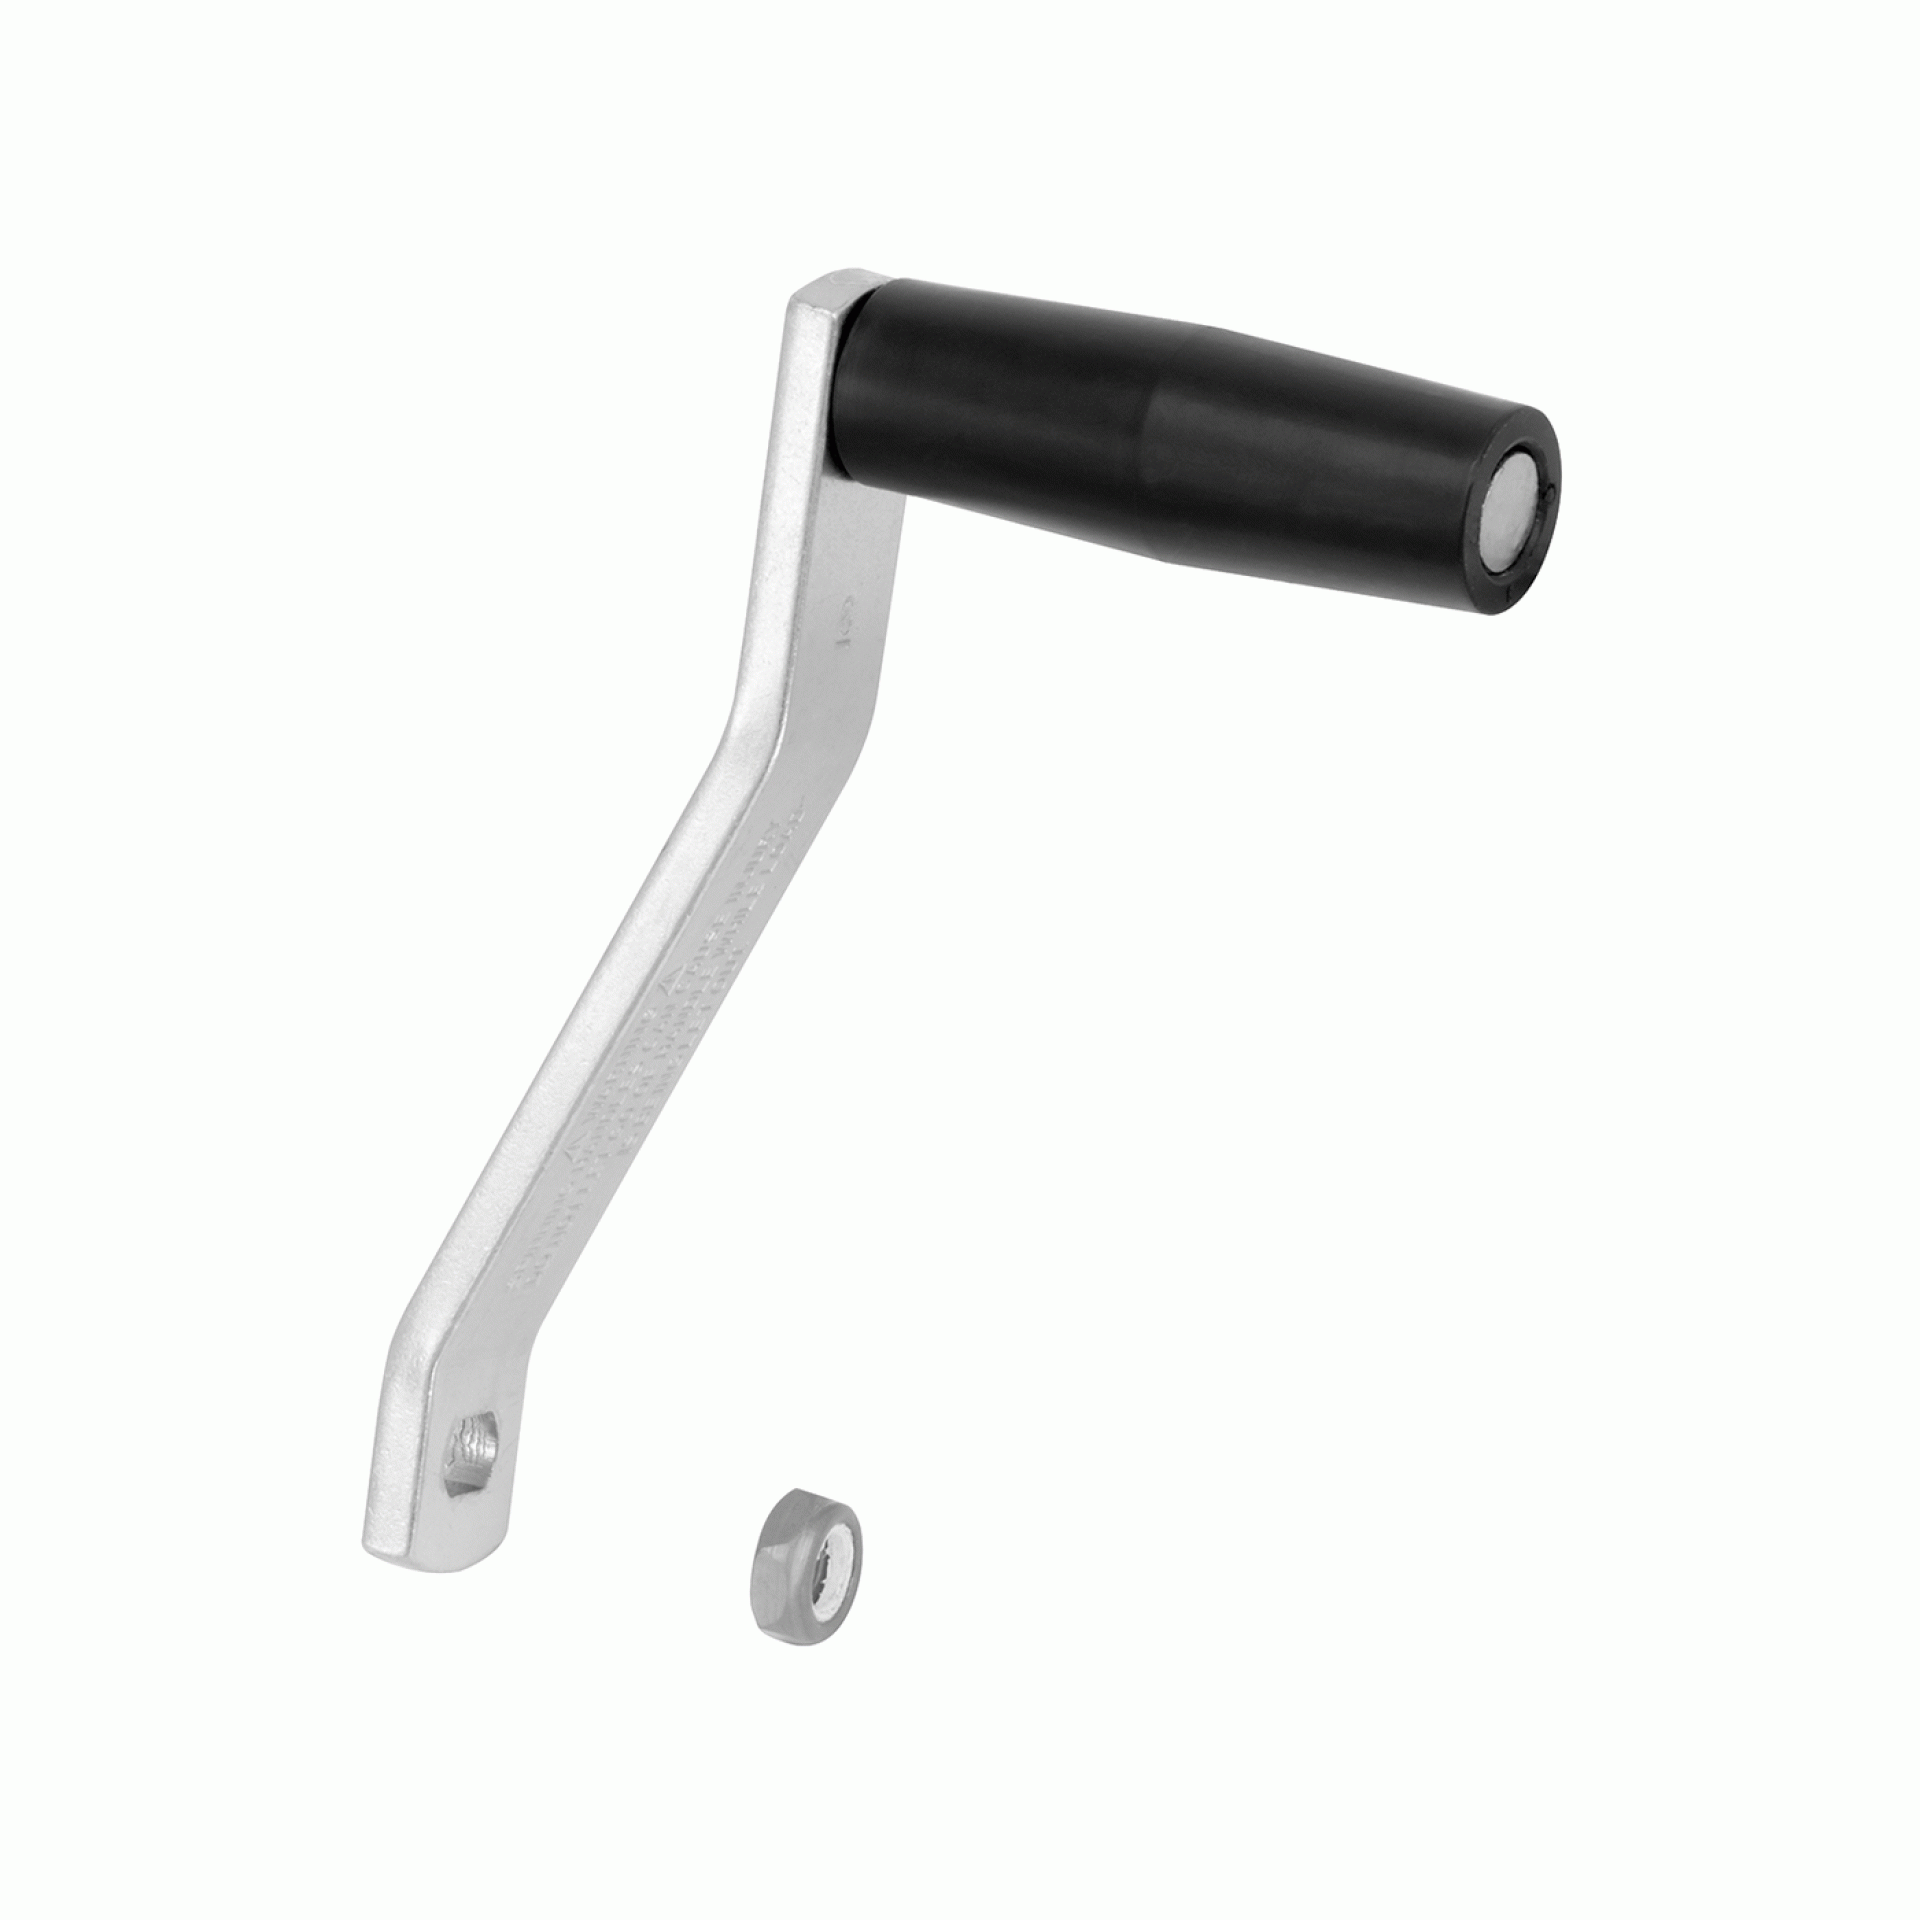 FULTON PERFORMANCE PRODUCTS | 501103 | Trailer Winch Handle - 6"